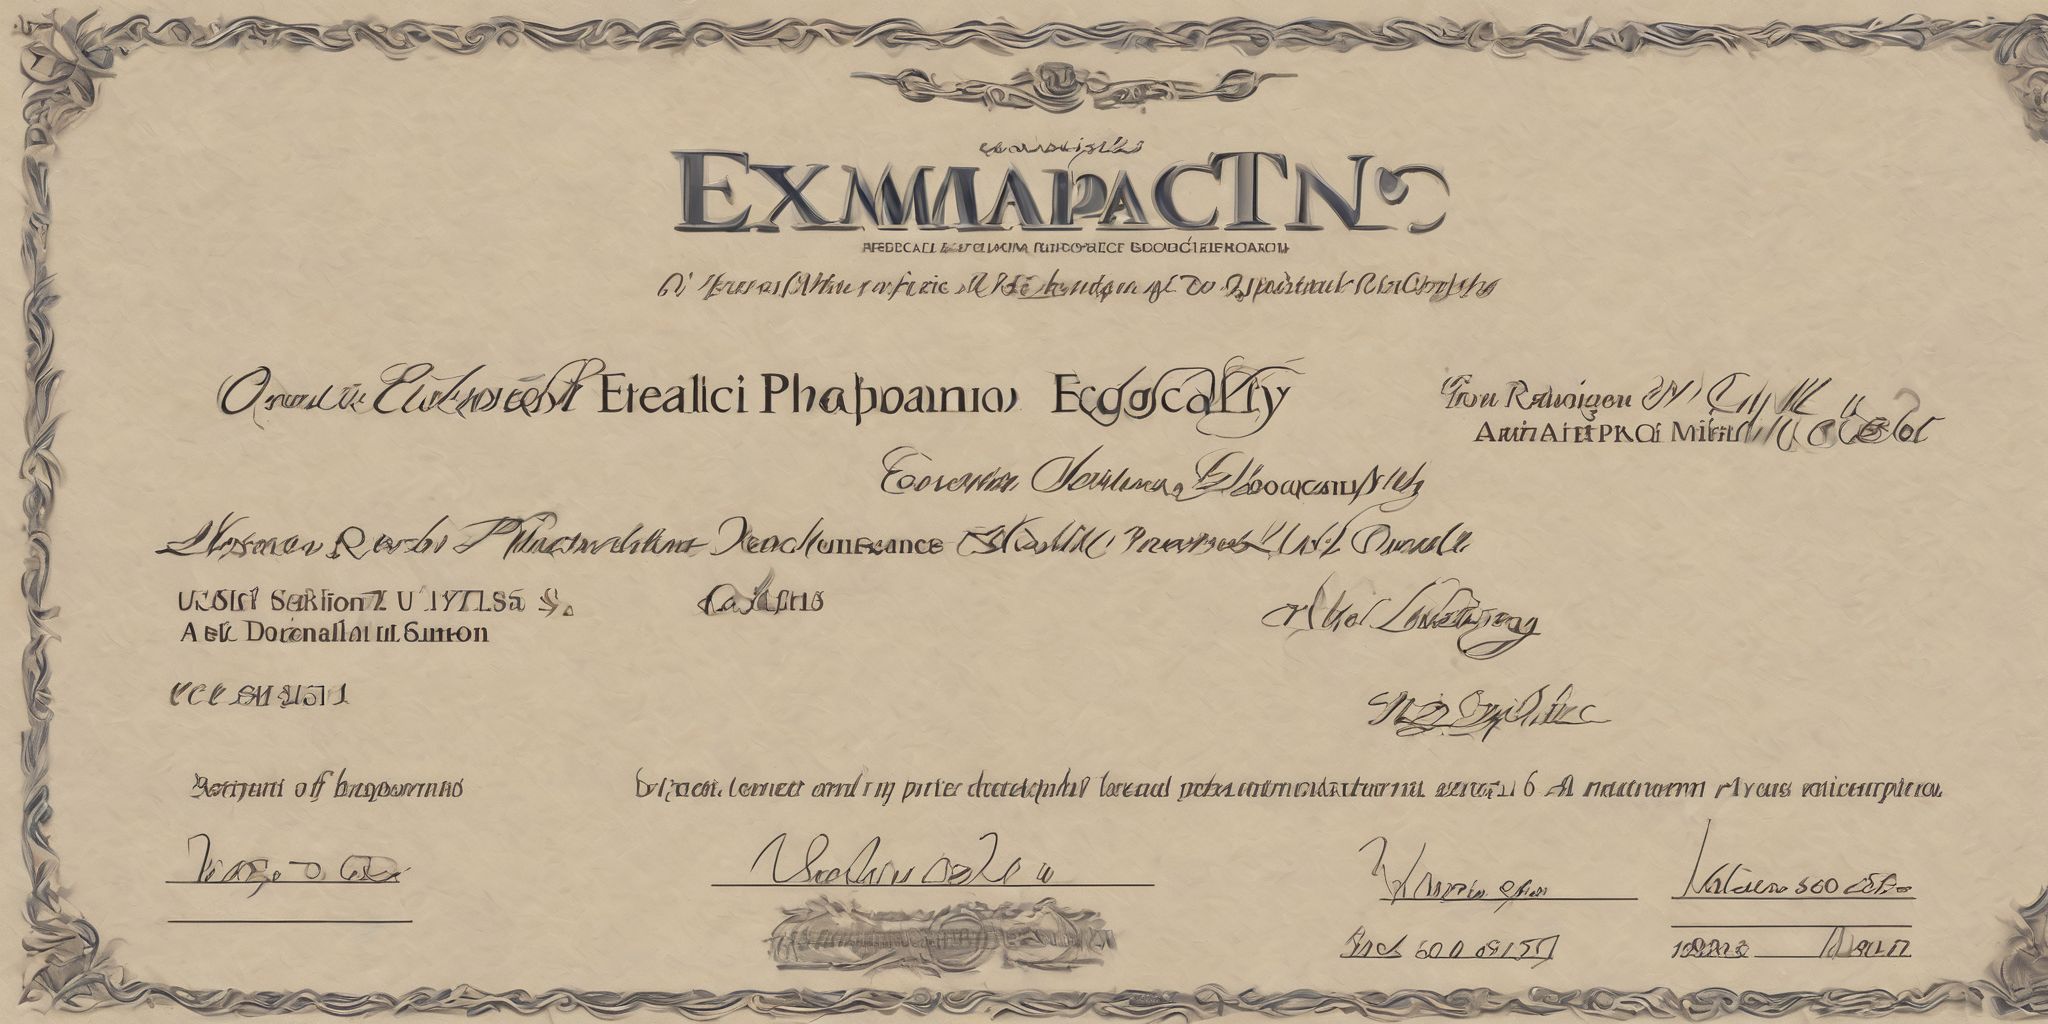 Exemption certificate  in realistic, photographic style